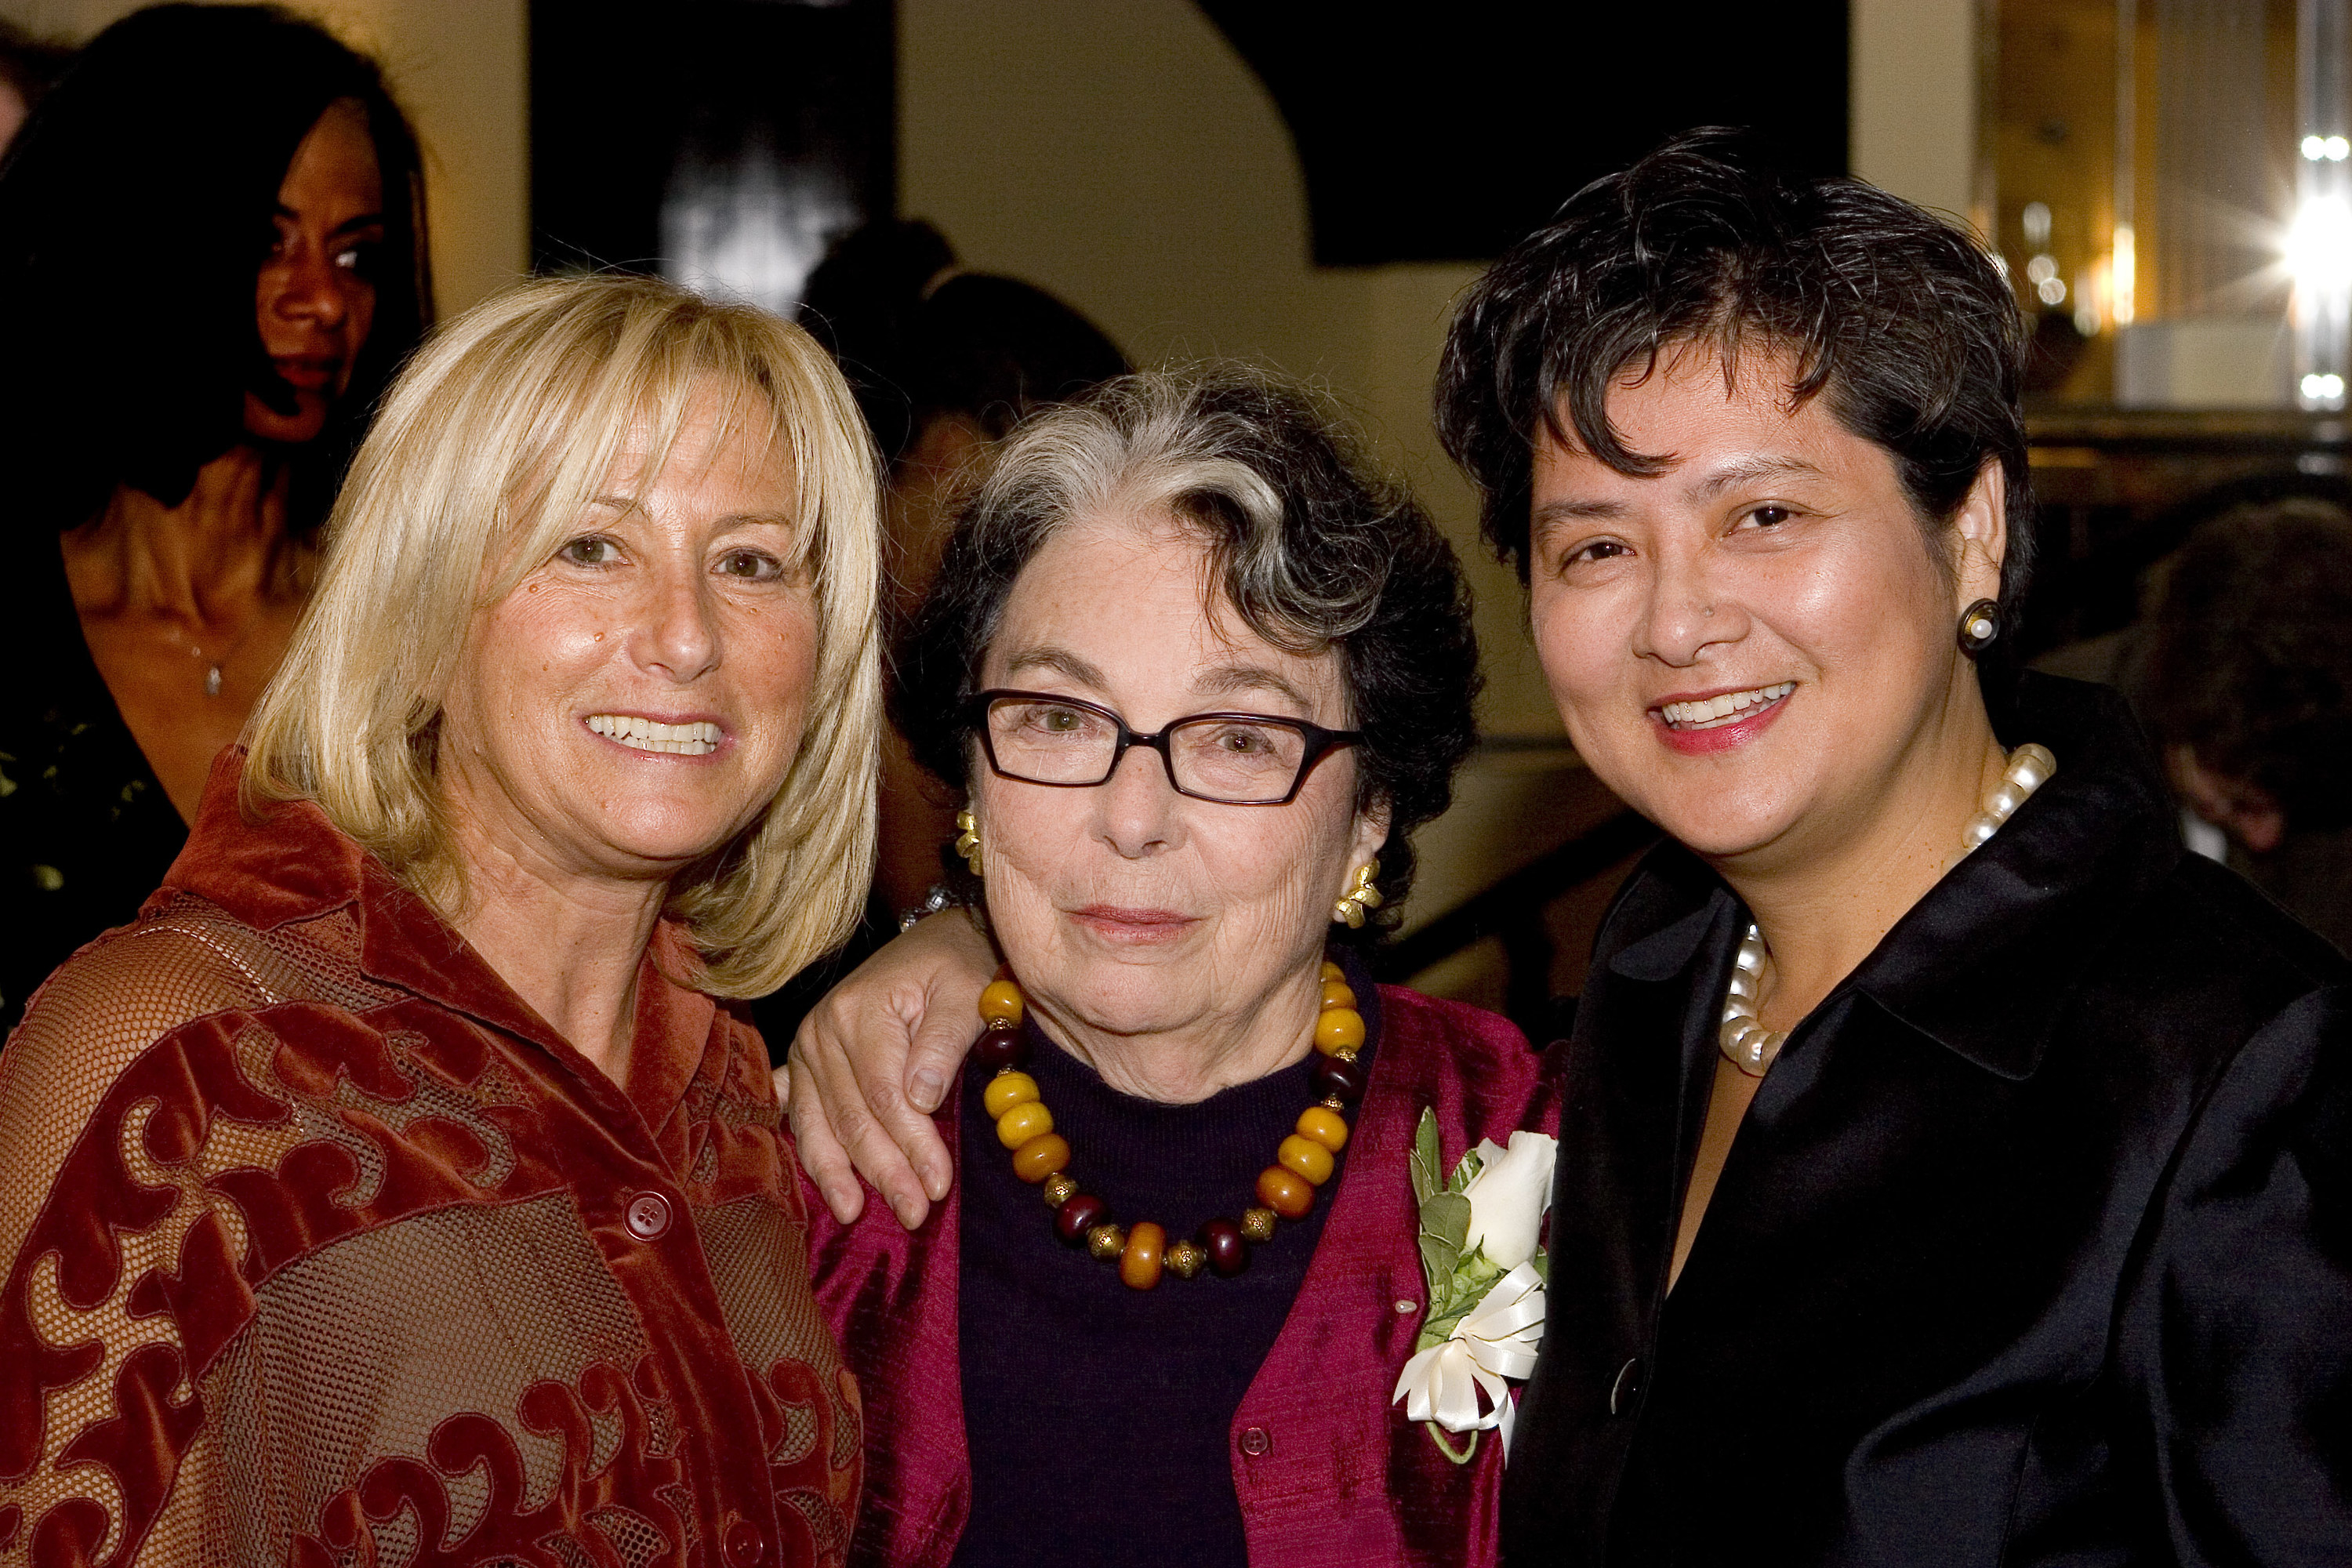 Joanie Horton, Feminist Press founder Florence Howe, and Chair, Board of Directors Linda Y. Peng smiling